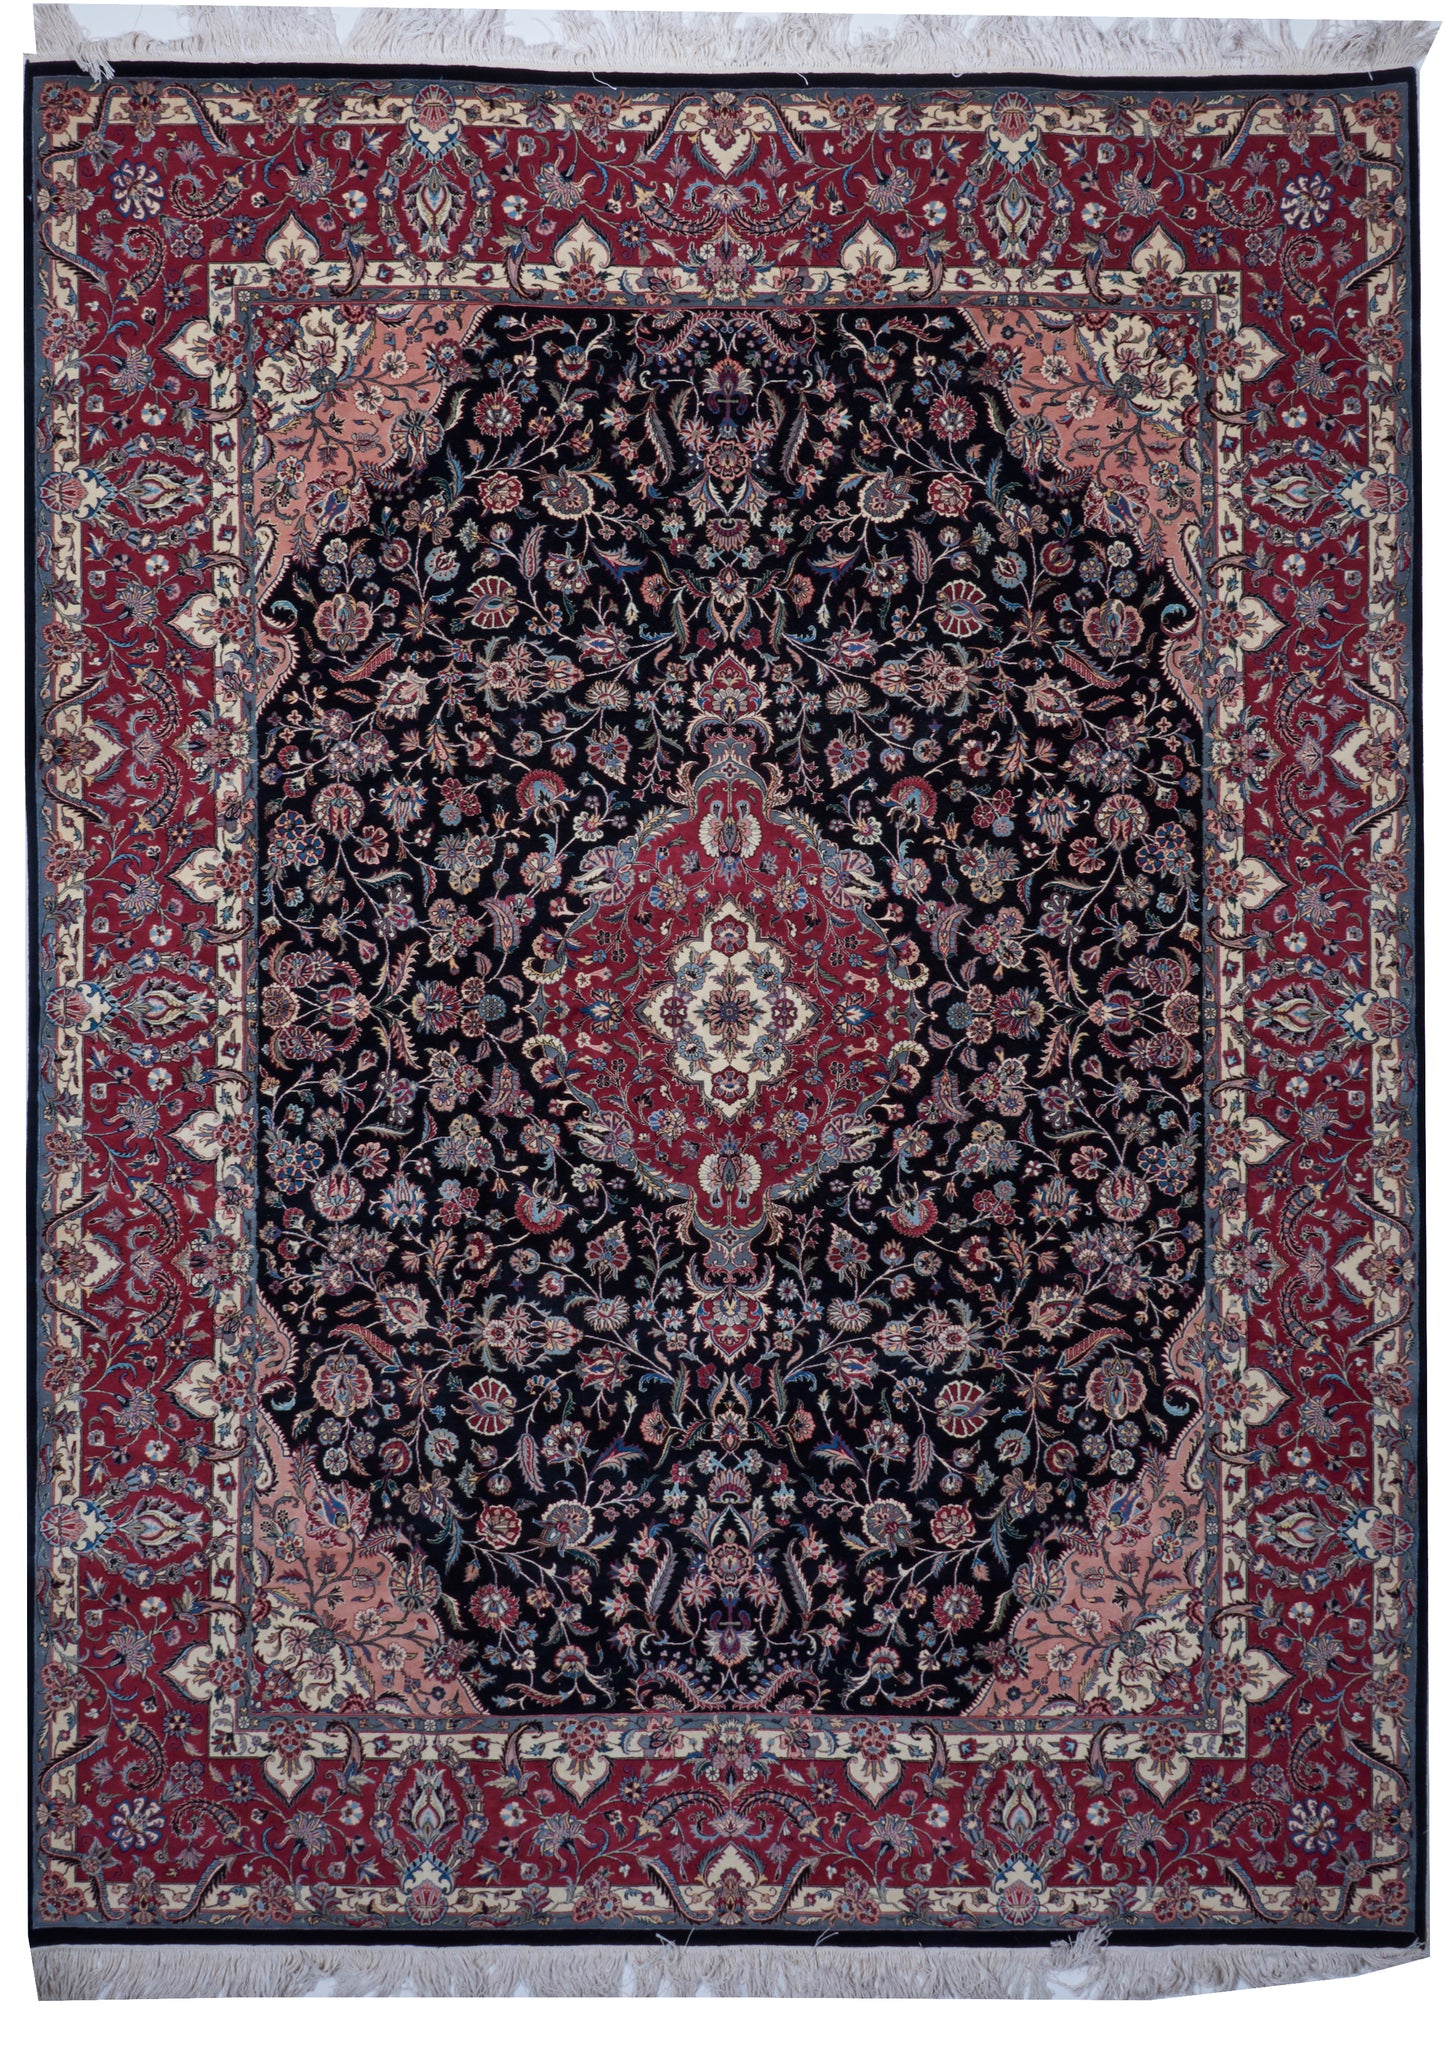 Traditional Hand Knotted Black Red Wool Rug 9'2 x 12'4 - IGotYourRug